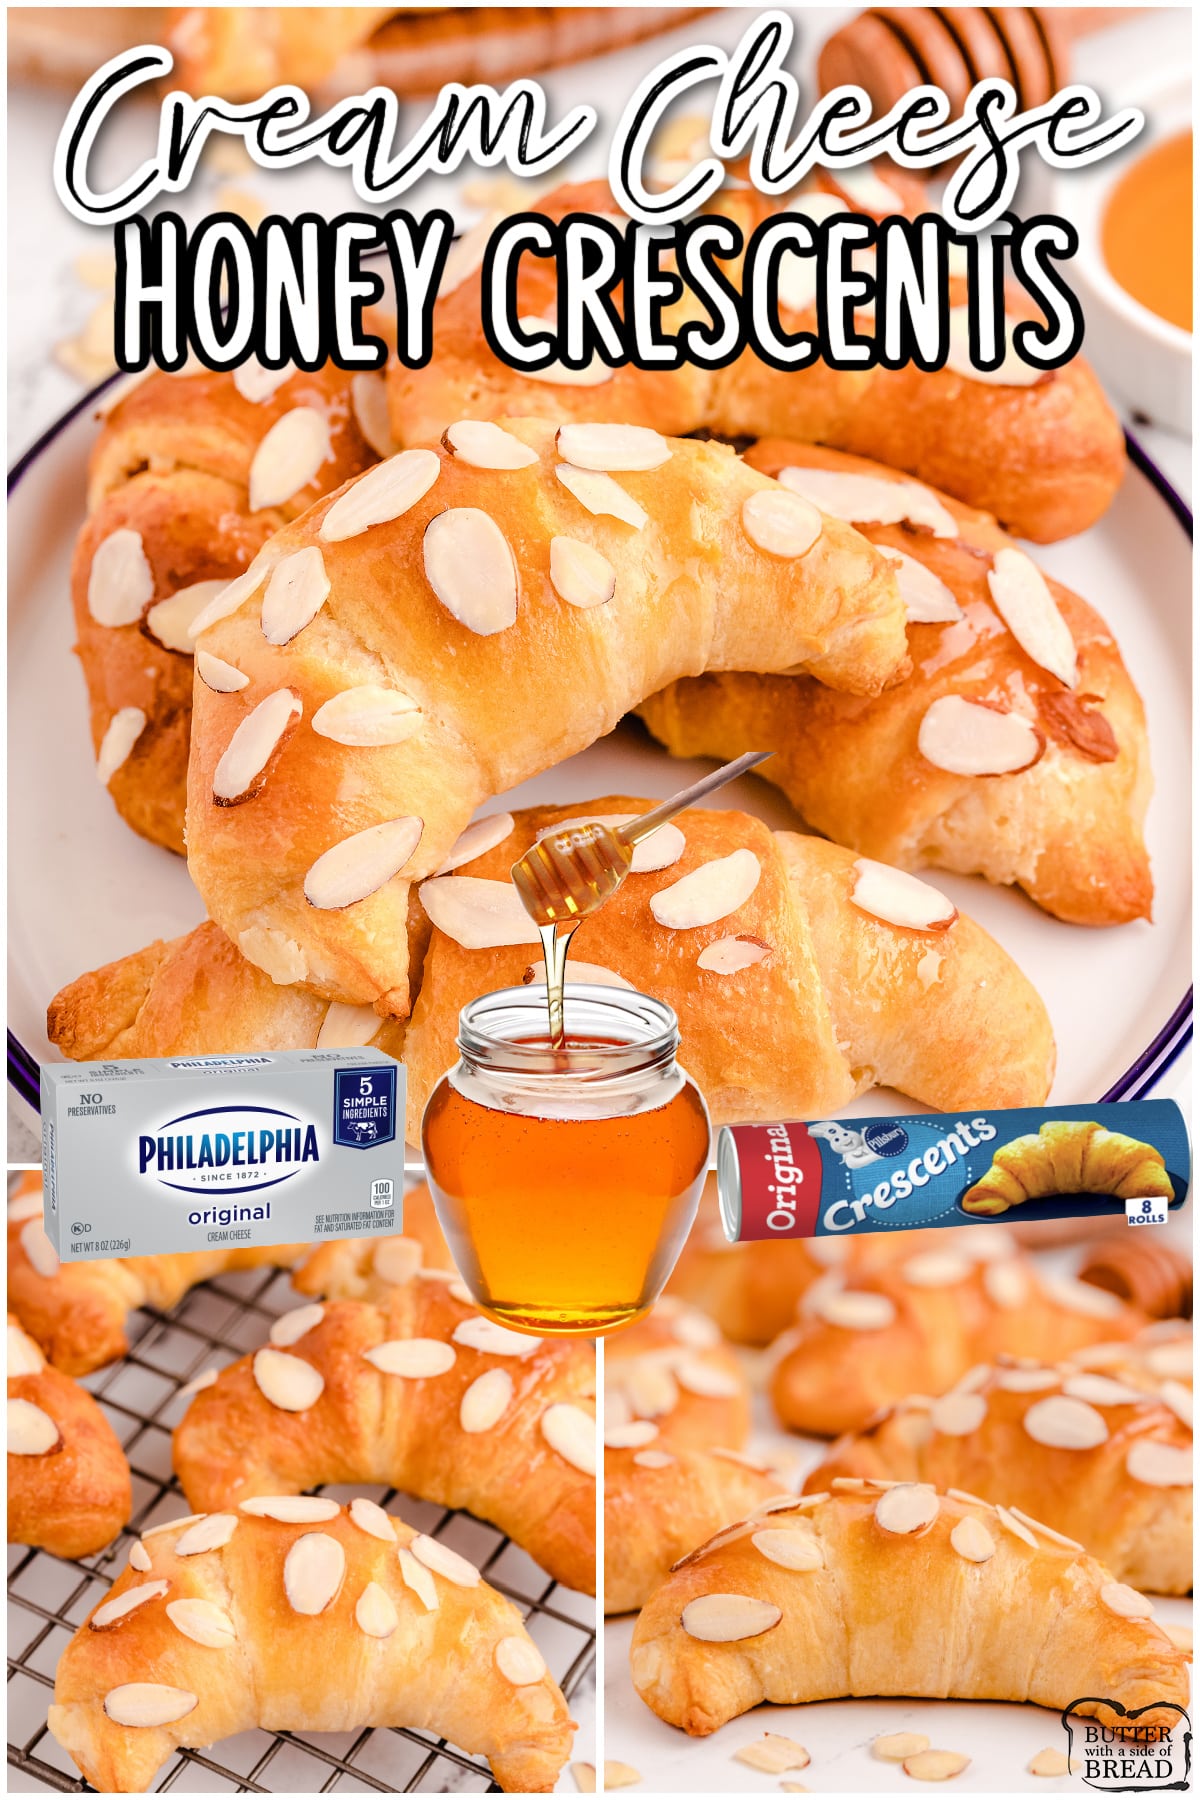 Honey cream cheese croissants made with just 4 ingredients in minutes! Light & flavorful crescent rolls baked with cream cheese and drizzled with honey!